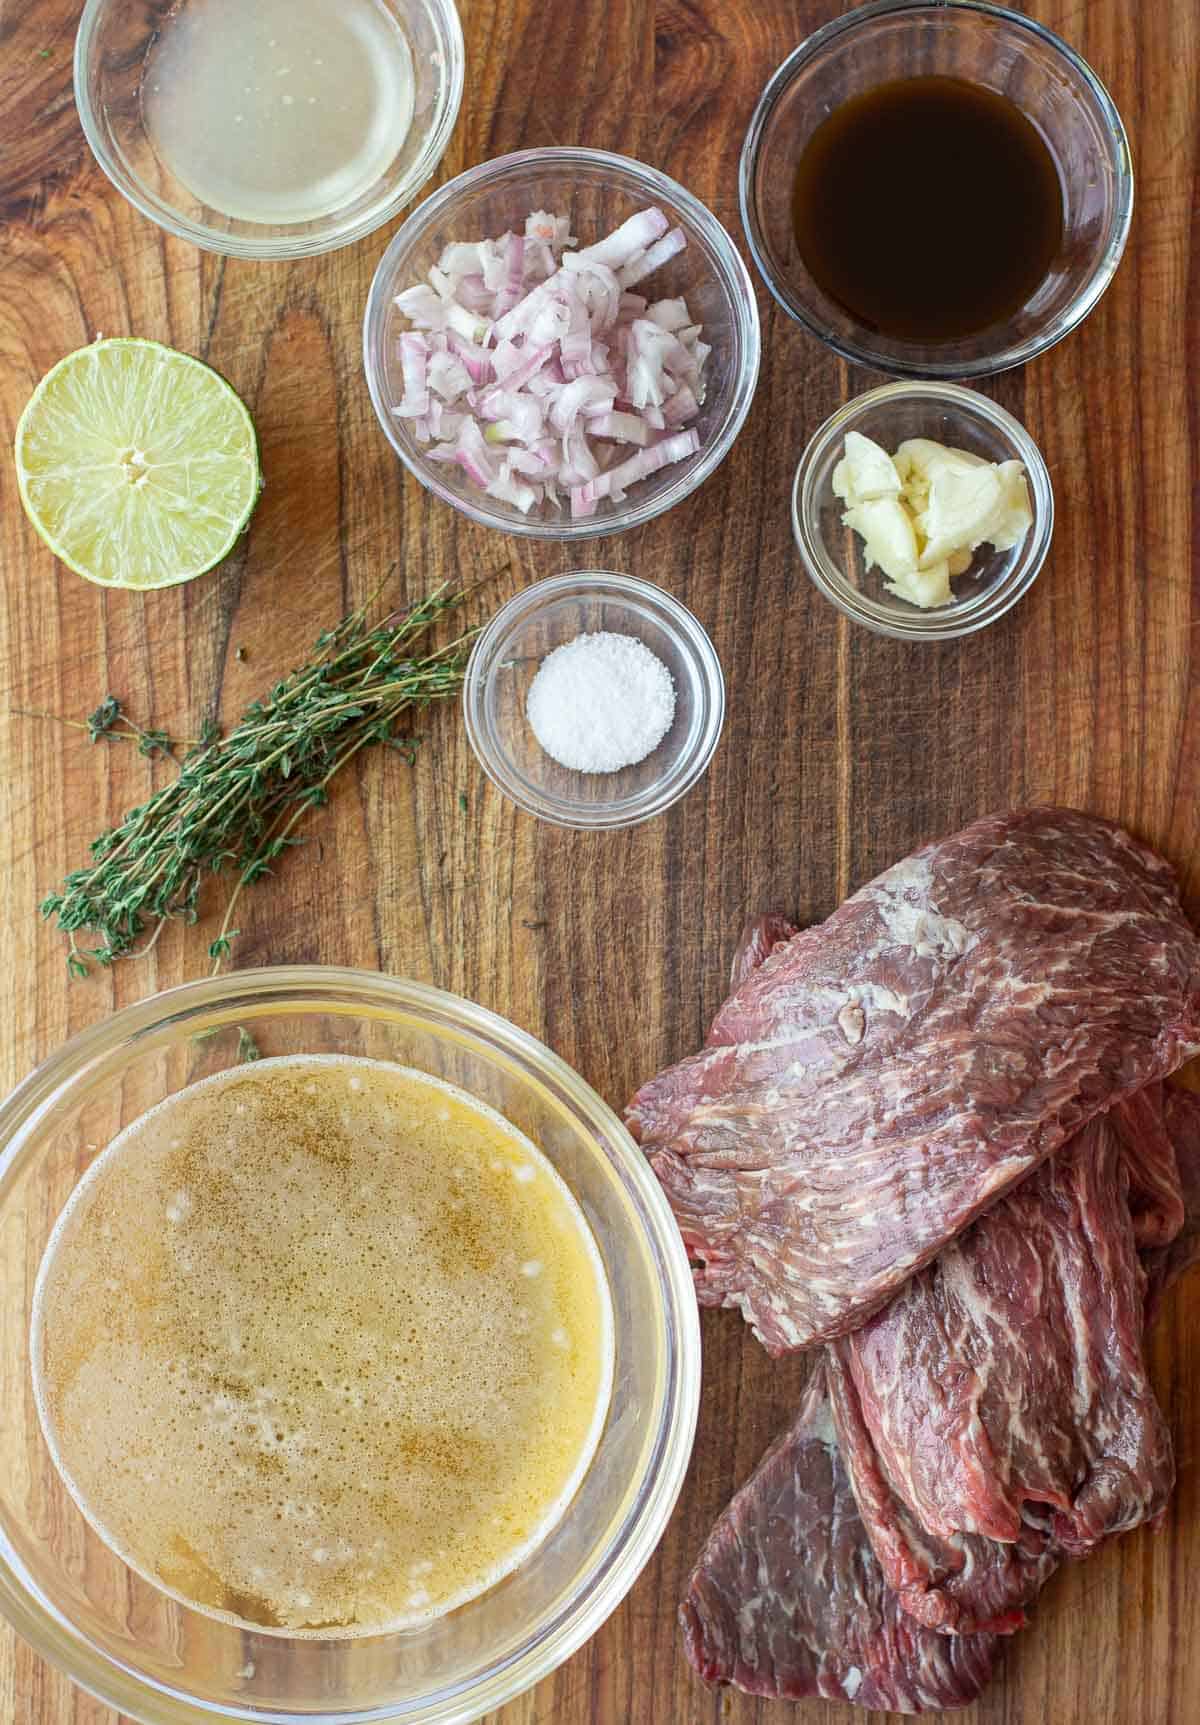 Beer Beef Marinade ingredients on a cutting board including beer, lime juice, Worcestershire, garlic, shallots, and bavette steak.